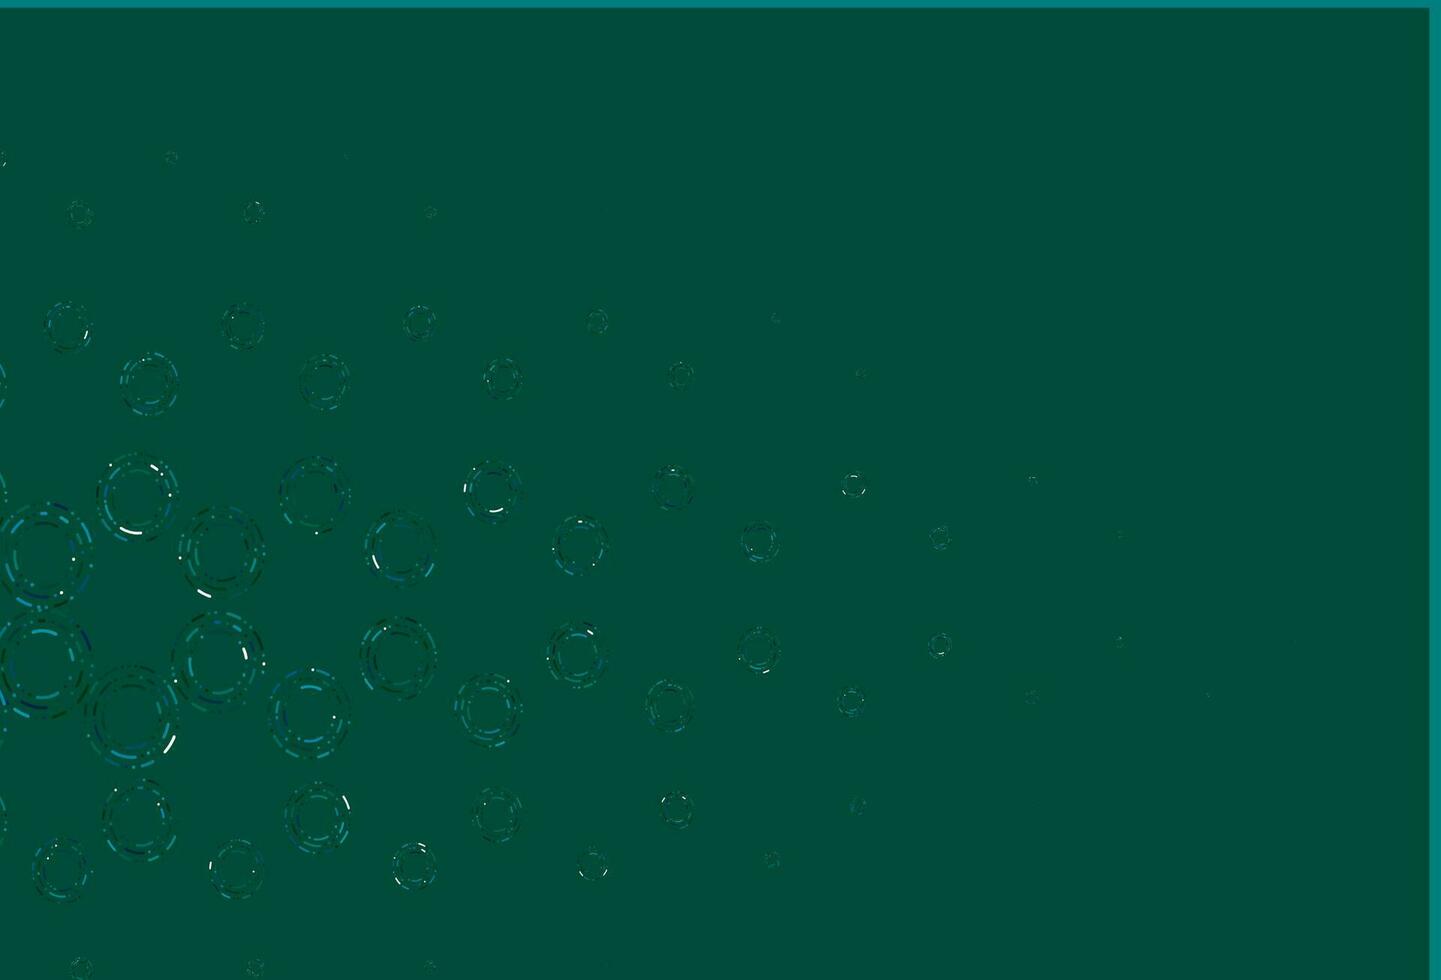 Light blue, green vector pattern with spheres.